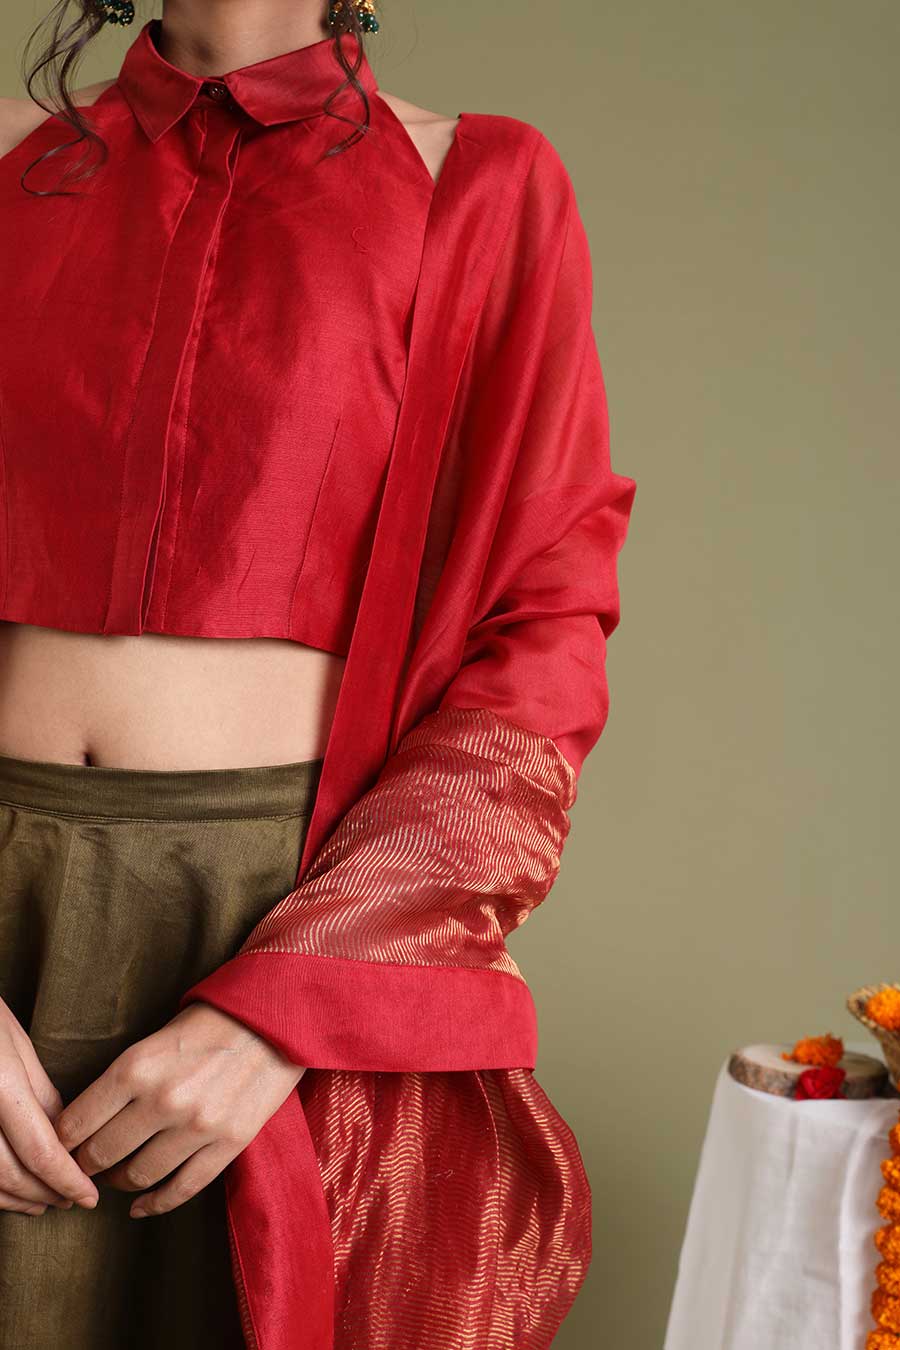 Red Top With Flared Skirt & Dupatta Set